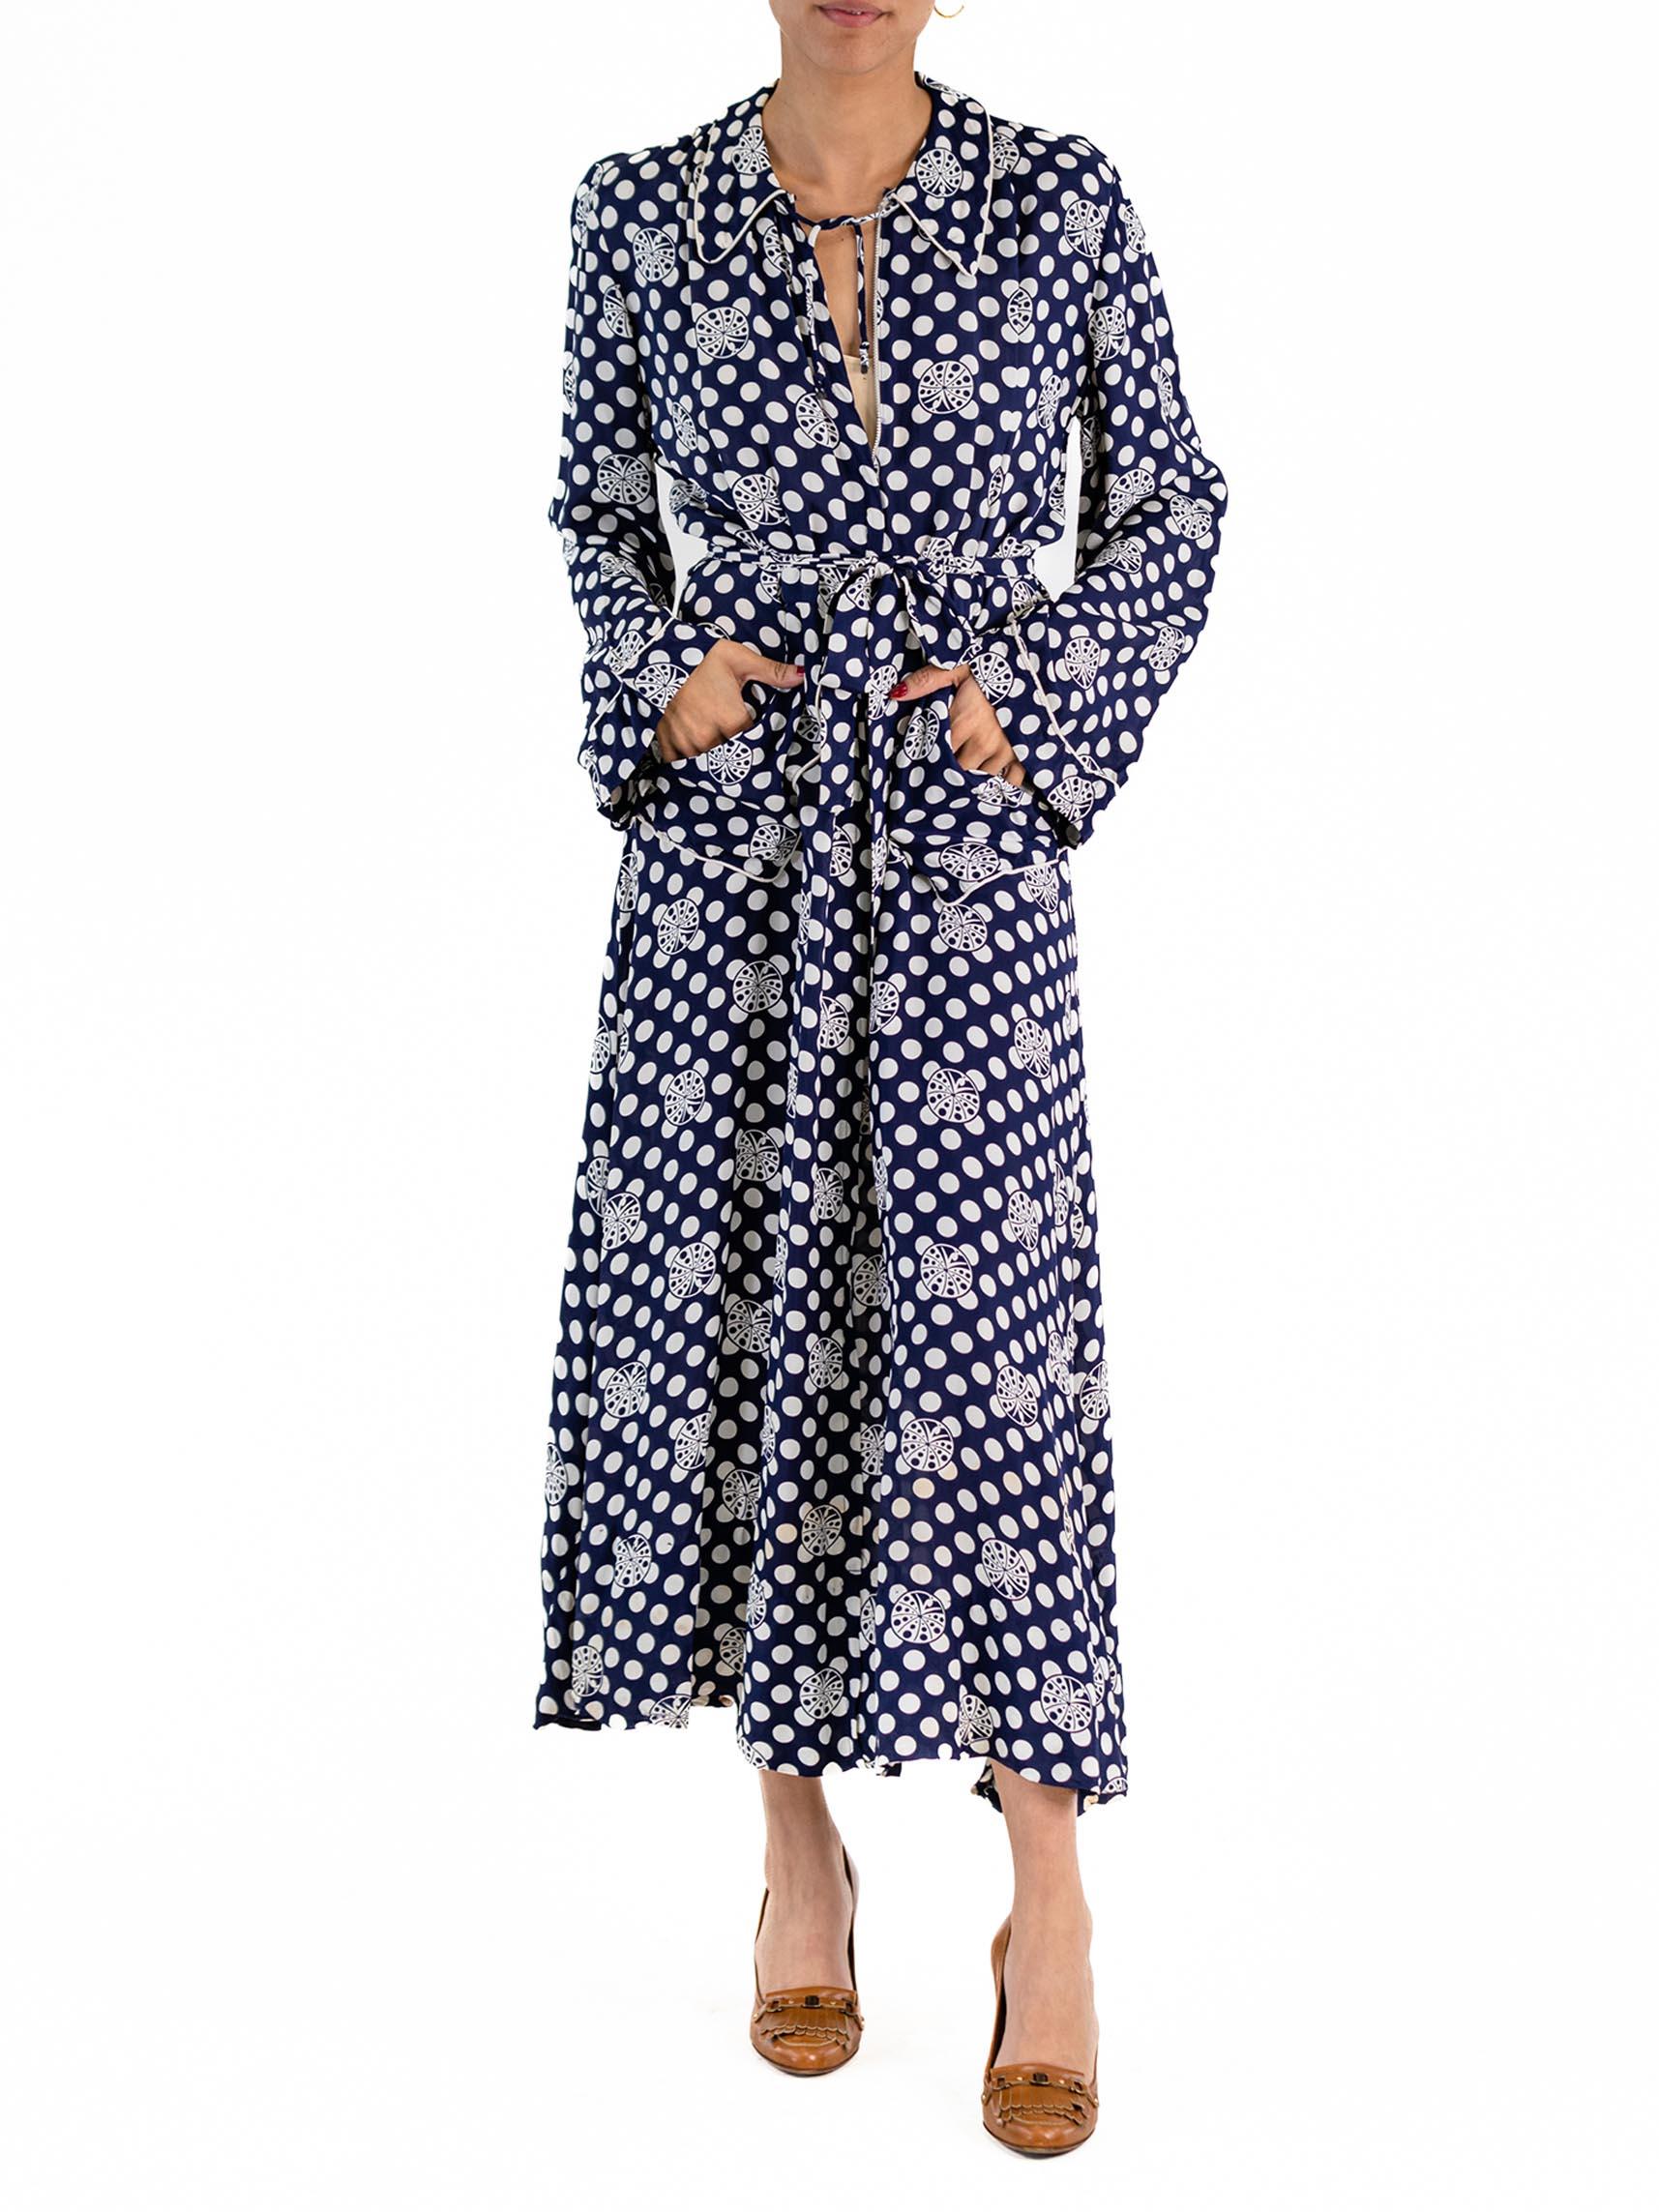 Women's 1940S Blue & White Cold Rayon Polka Dot Dress With Zipper Front Pockets For Sale